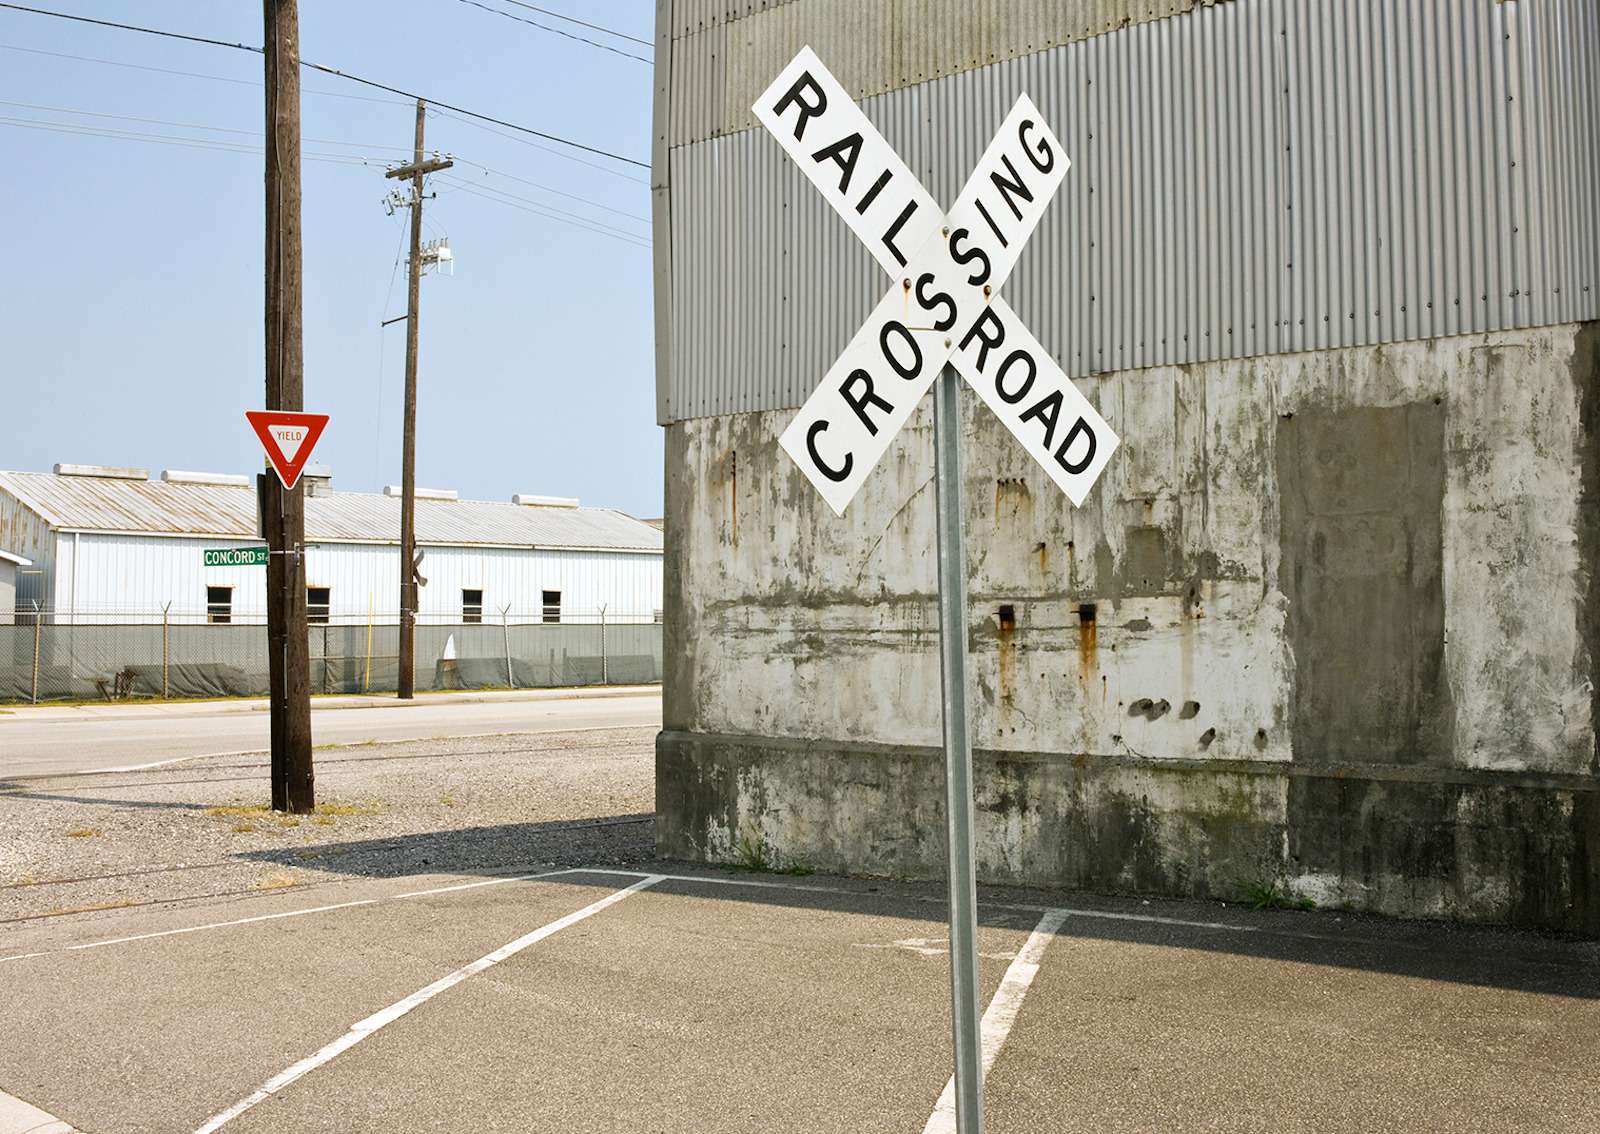 Railroad crossing sign in small town